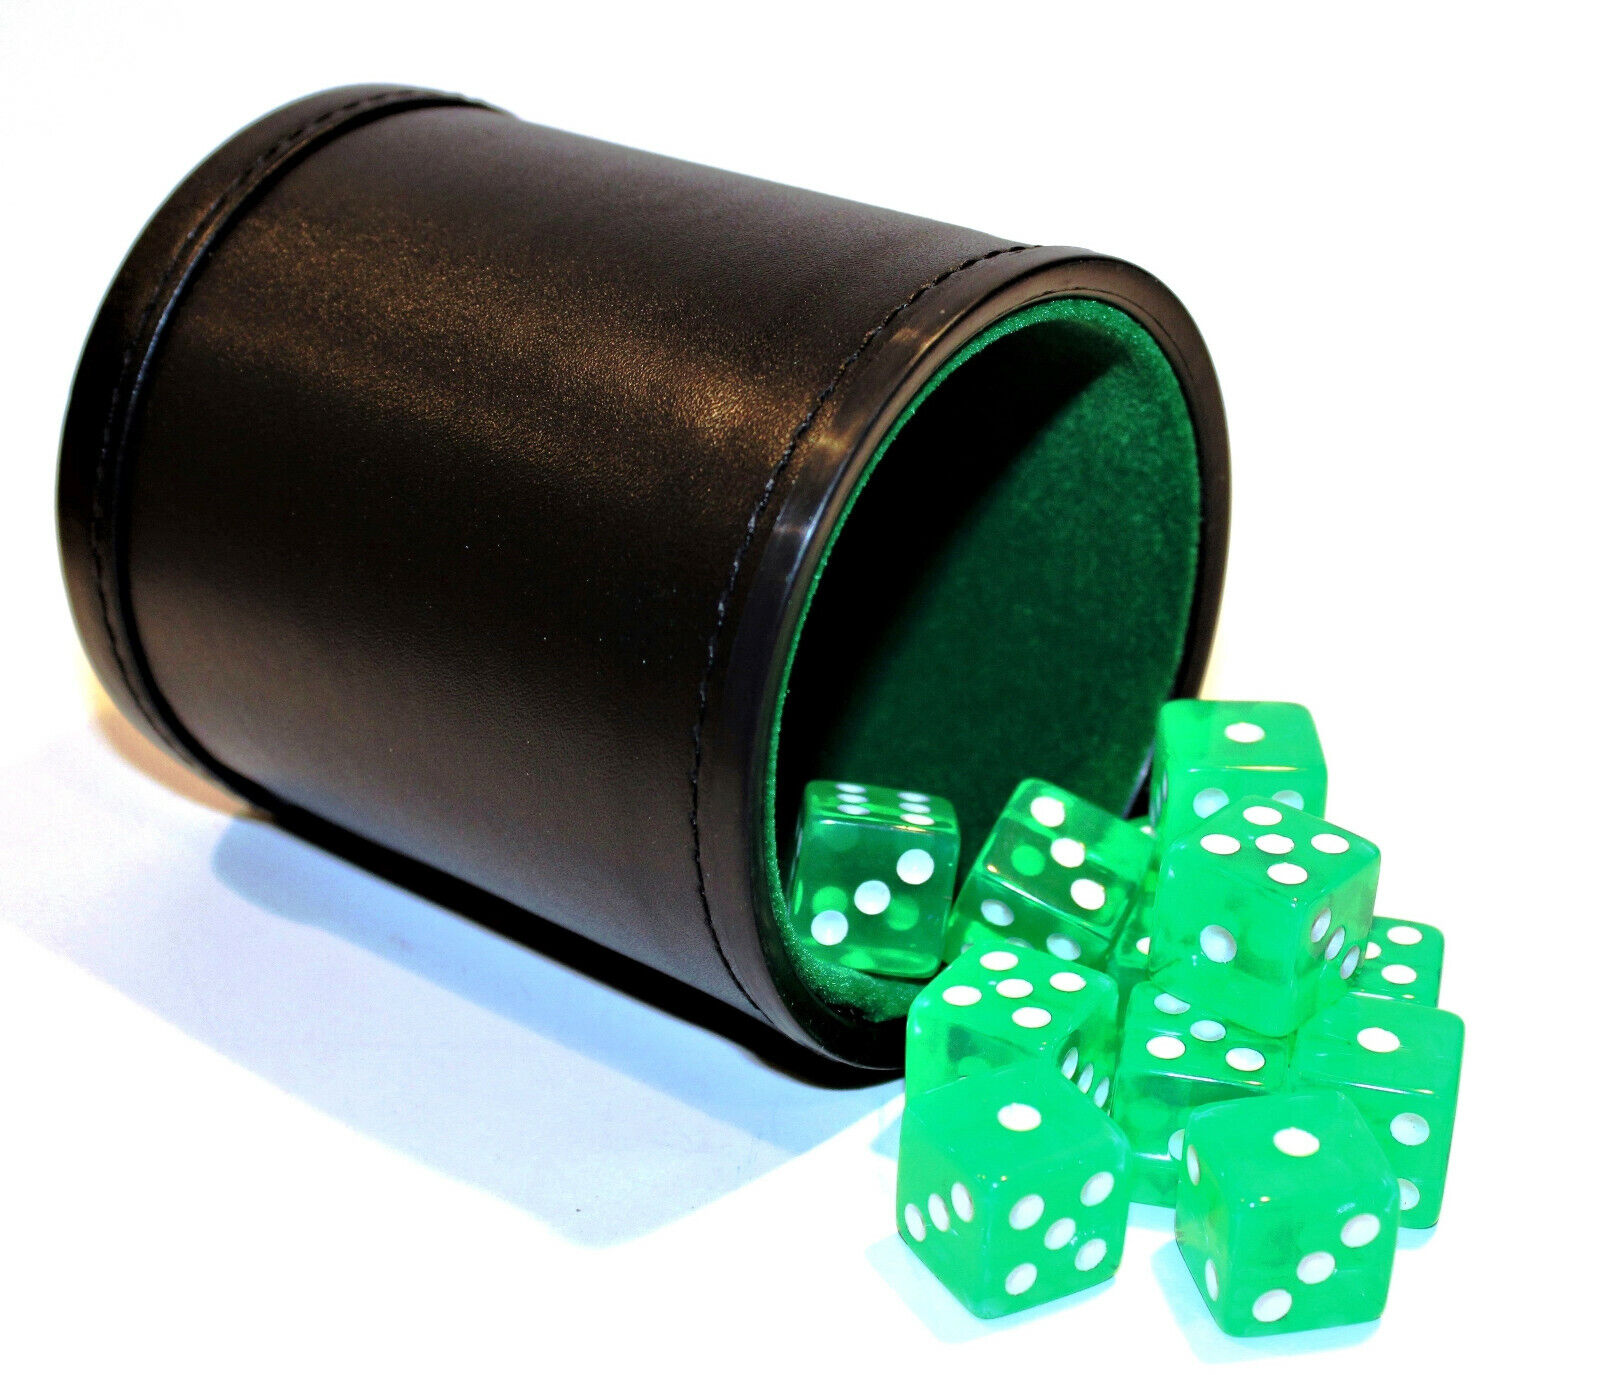 Bicast Leather Dice Cup w/ Green Felt Lining & 12 Translucent Green Game Dice